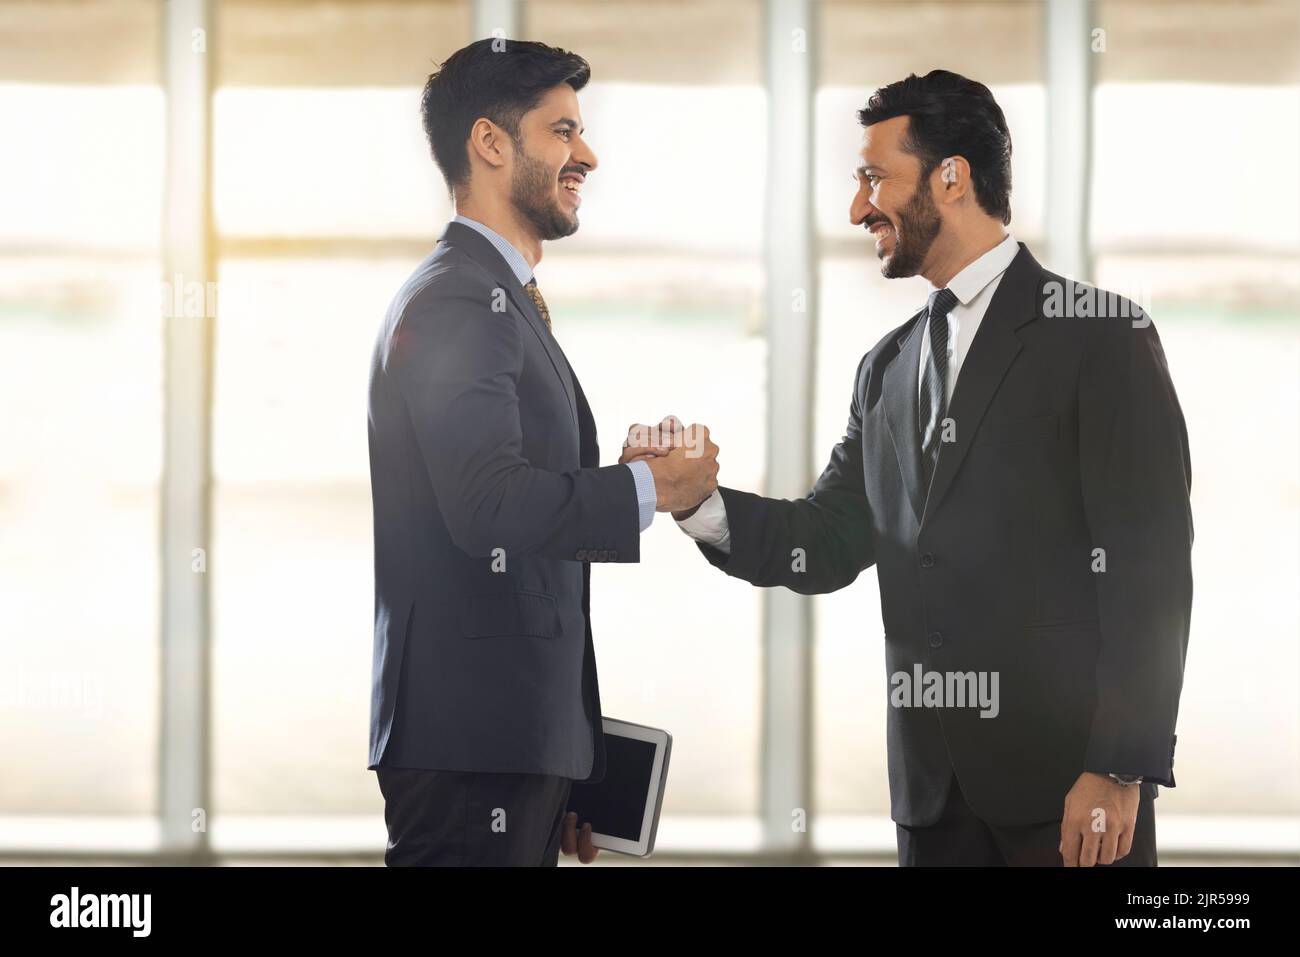 Corporate employees in formal business standing together in office while holding each other's hand with firm grip. Stock Photo